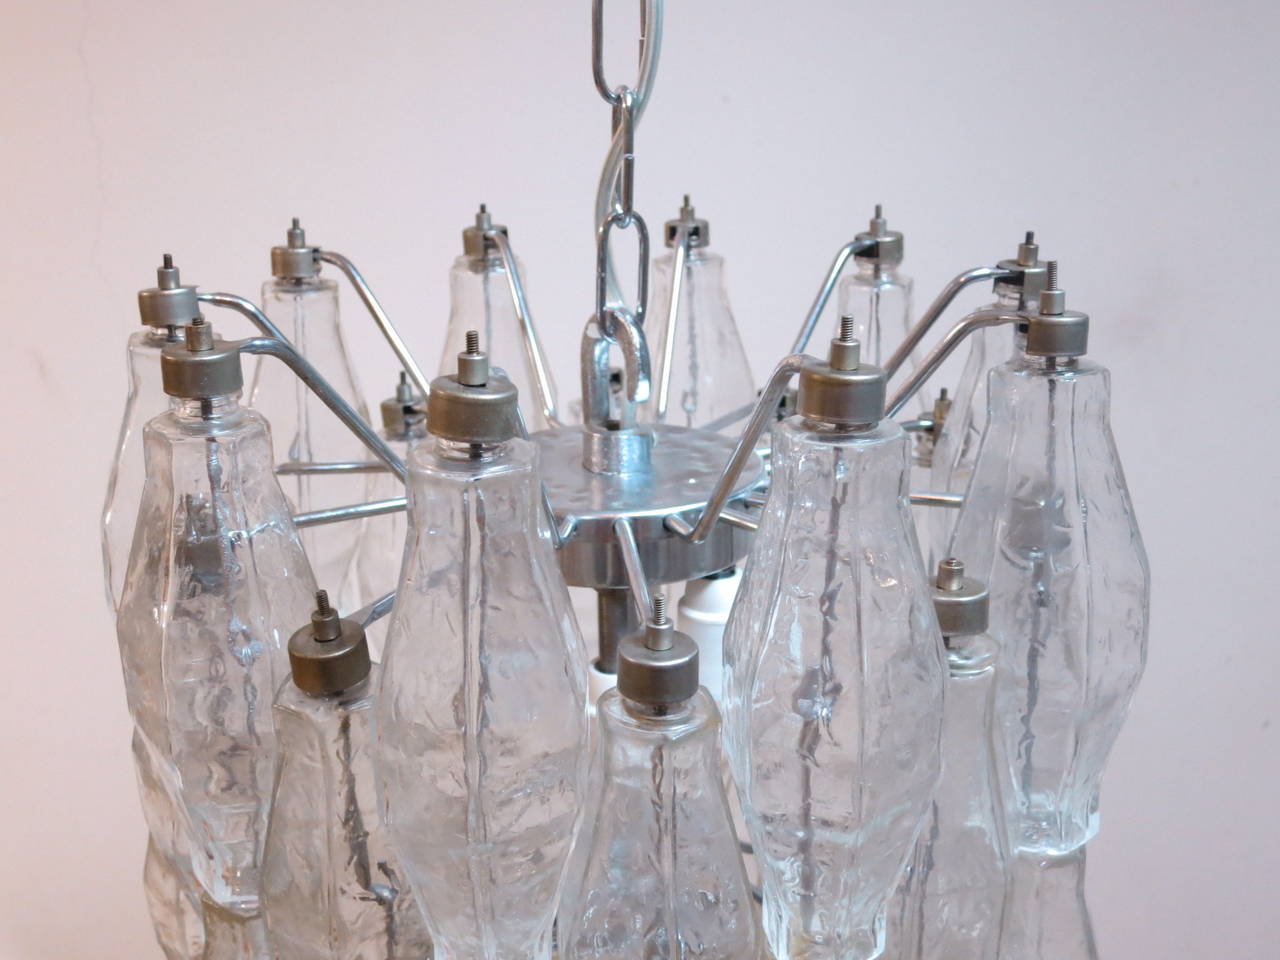 A polyhedral chandelier in the style of Venini. Has six lights and chrome hardware.